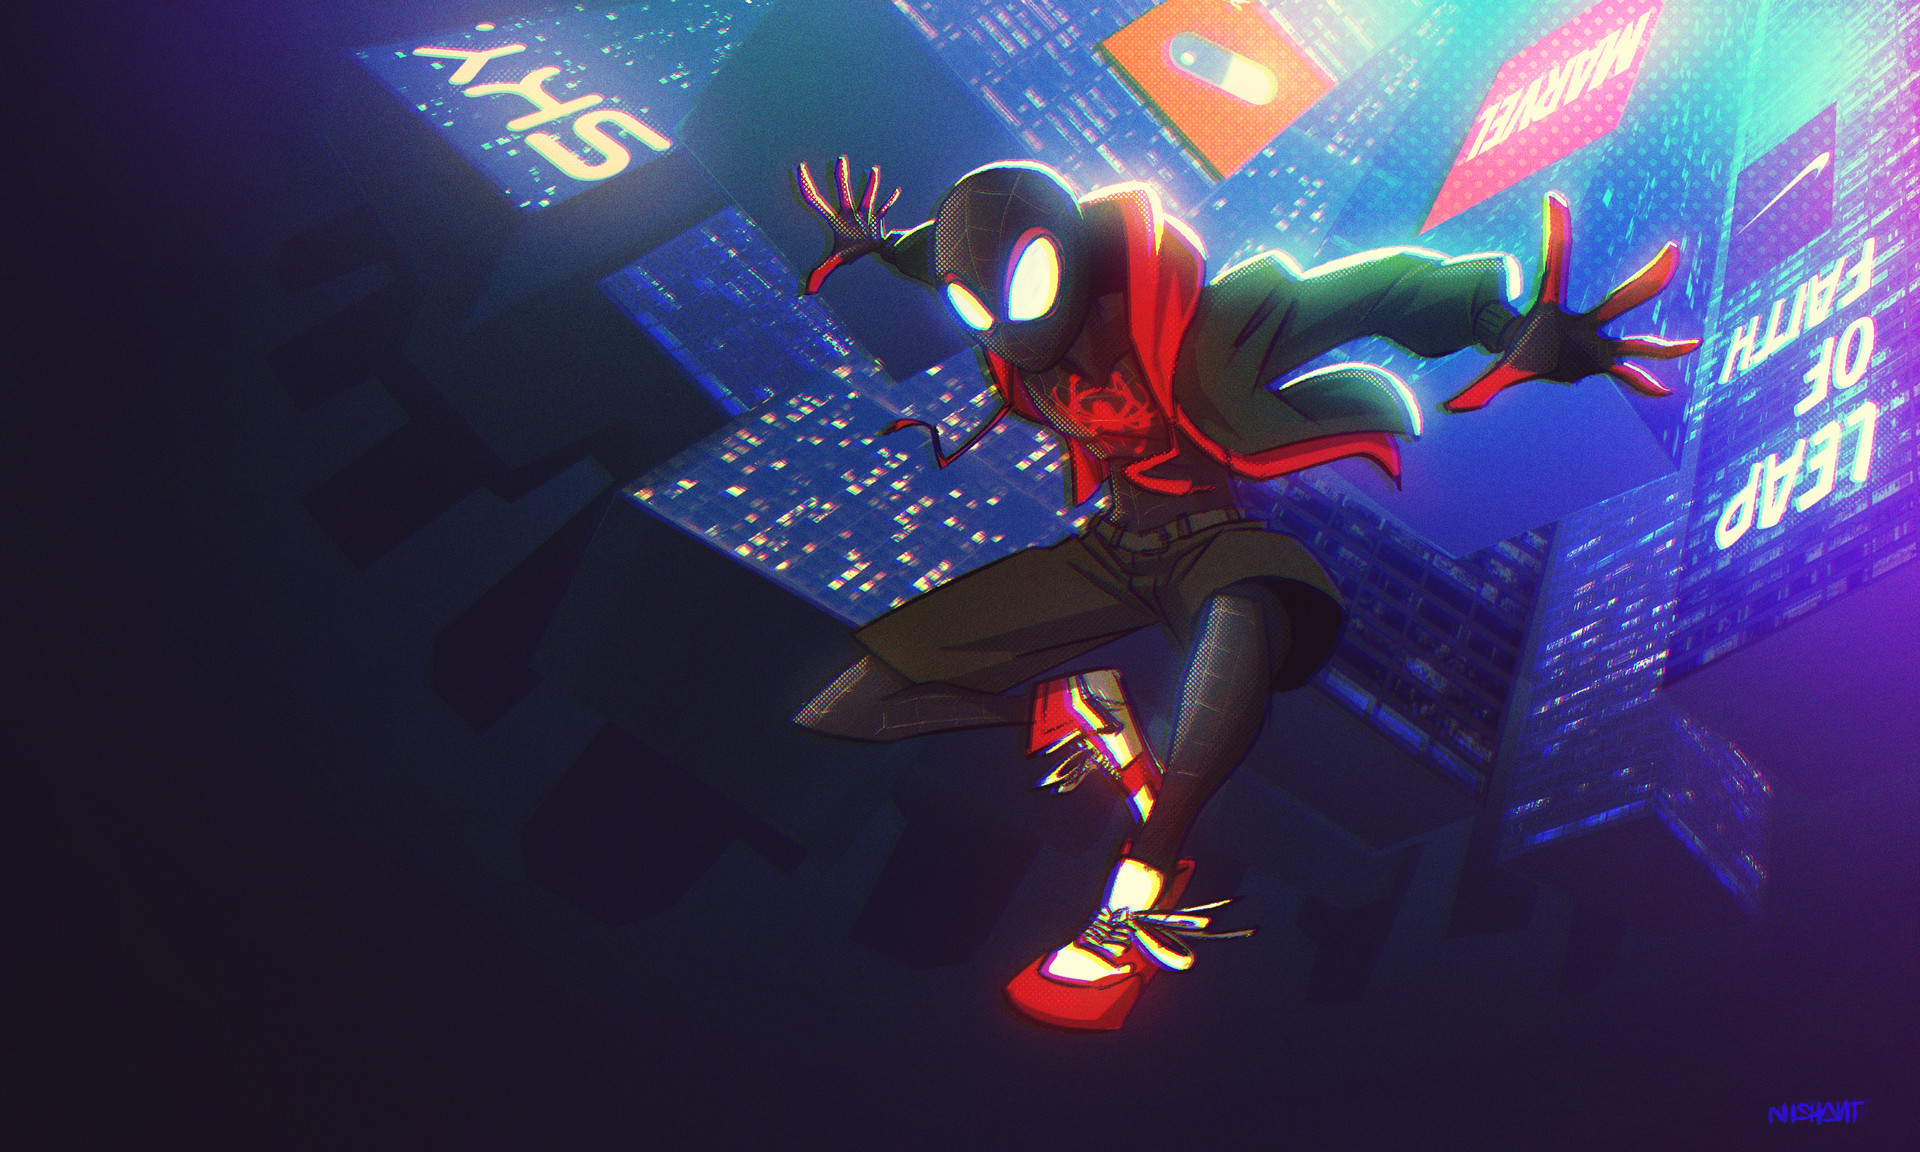  Miles Morales Cellphone FHD pic